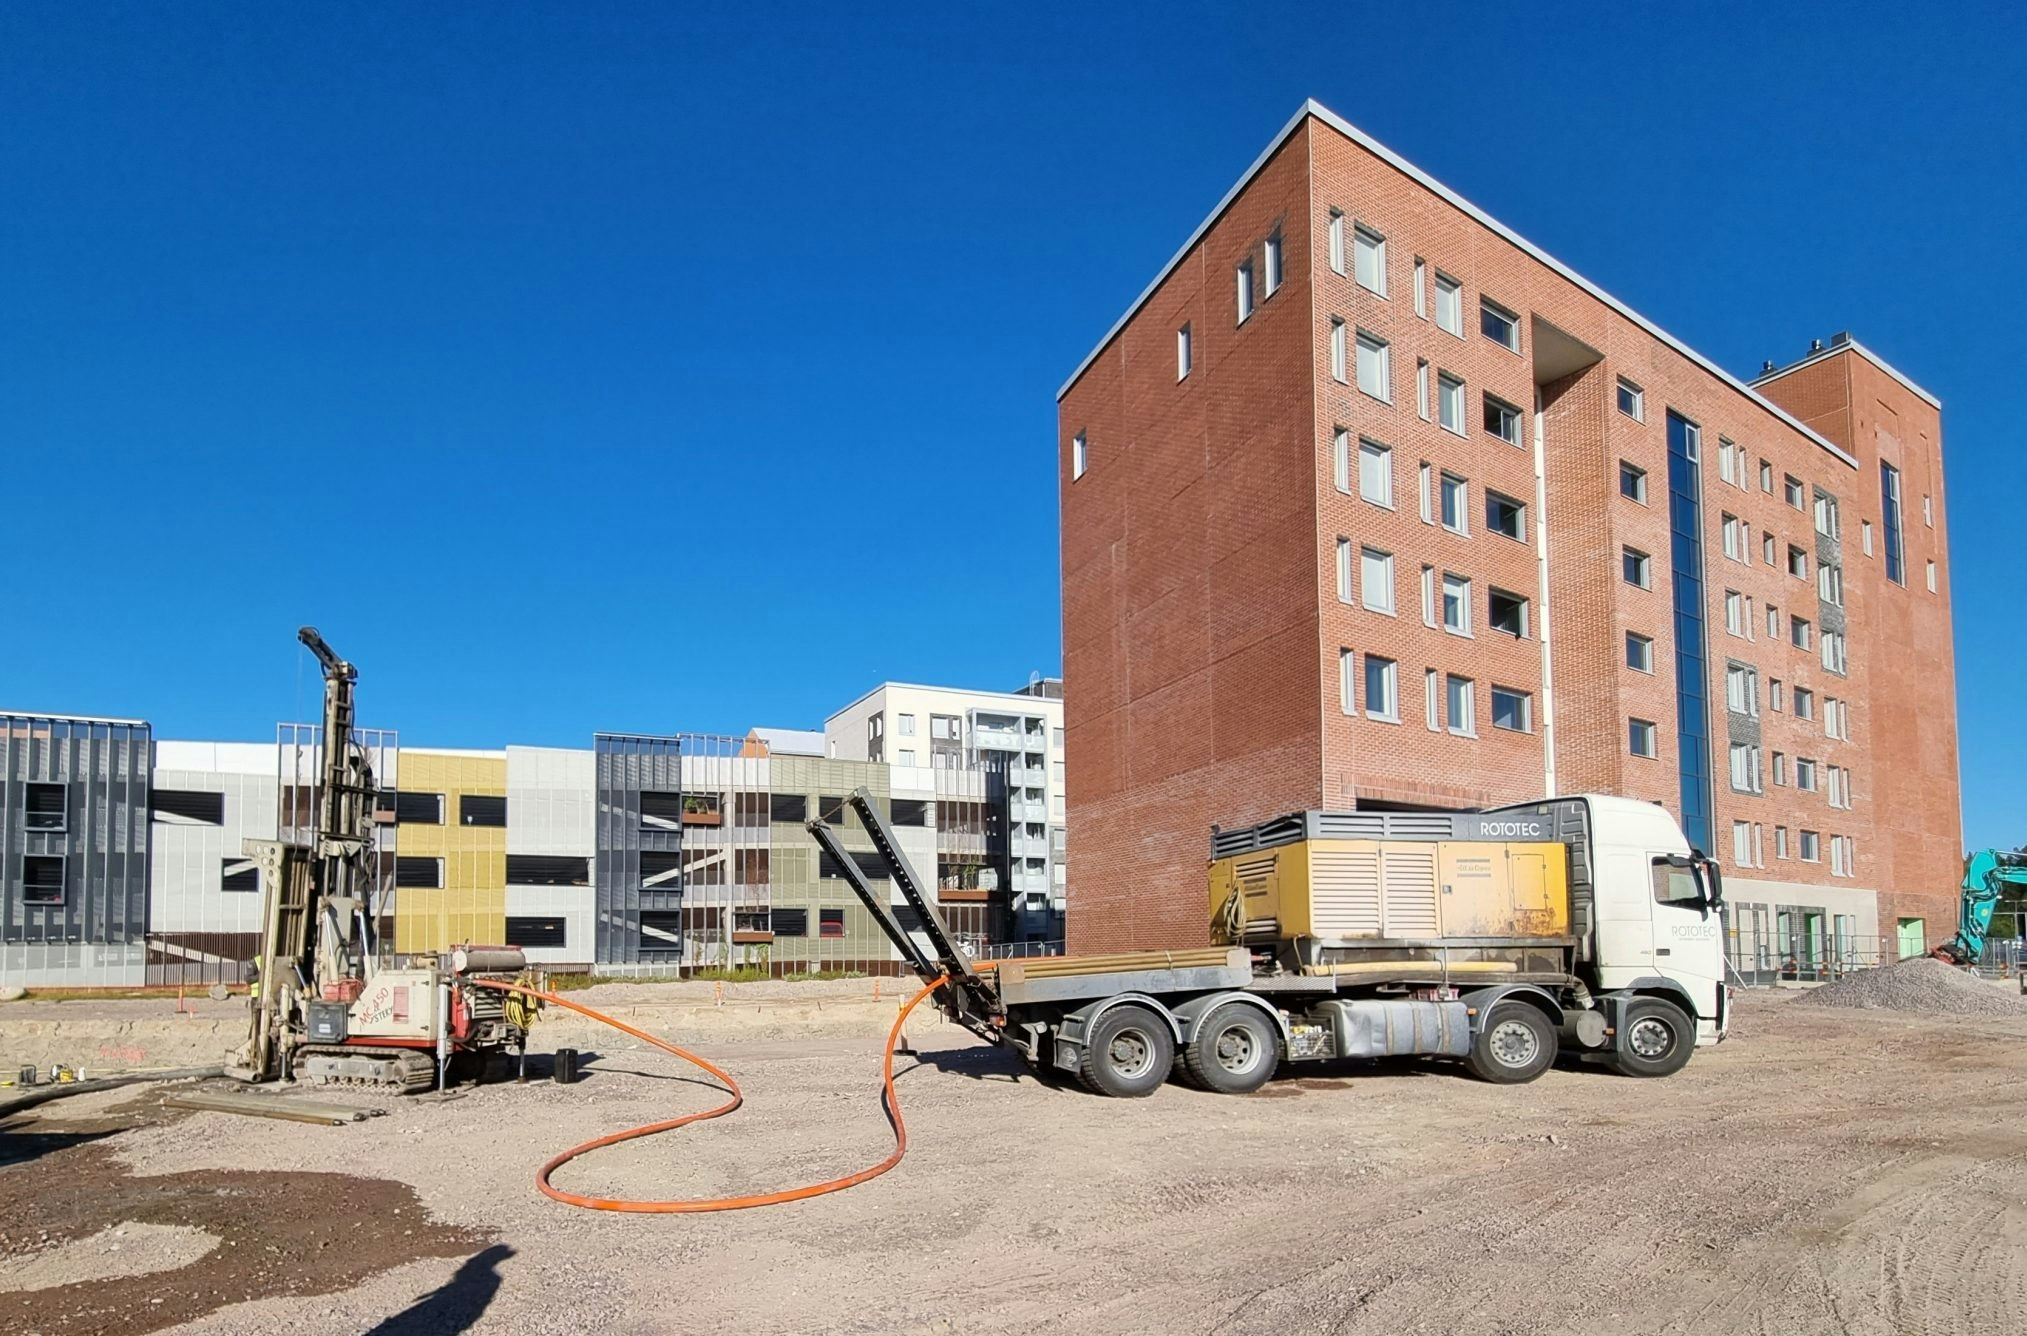 An image of a truck helping to install a ground-source heating system next to a new-build six-storey block of flats 